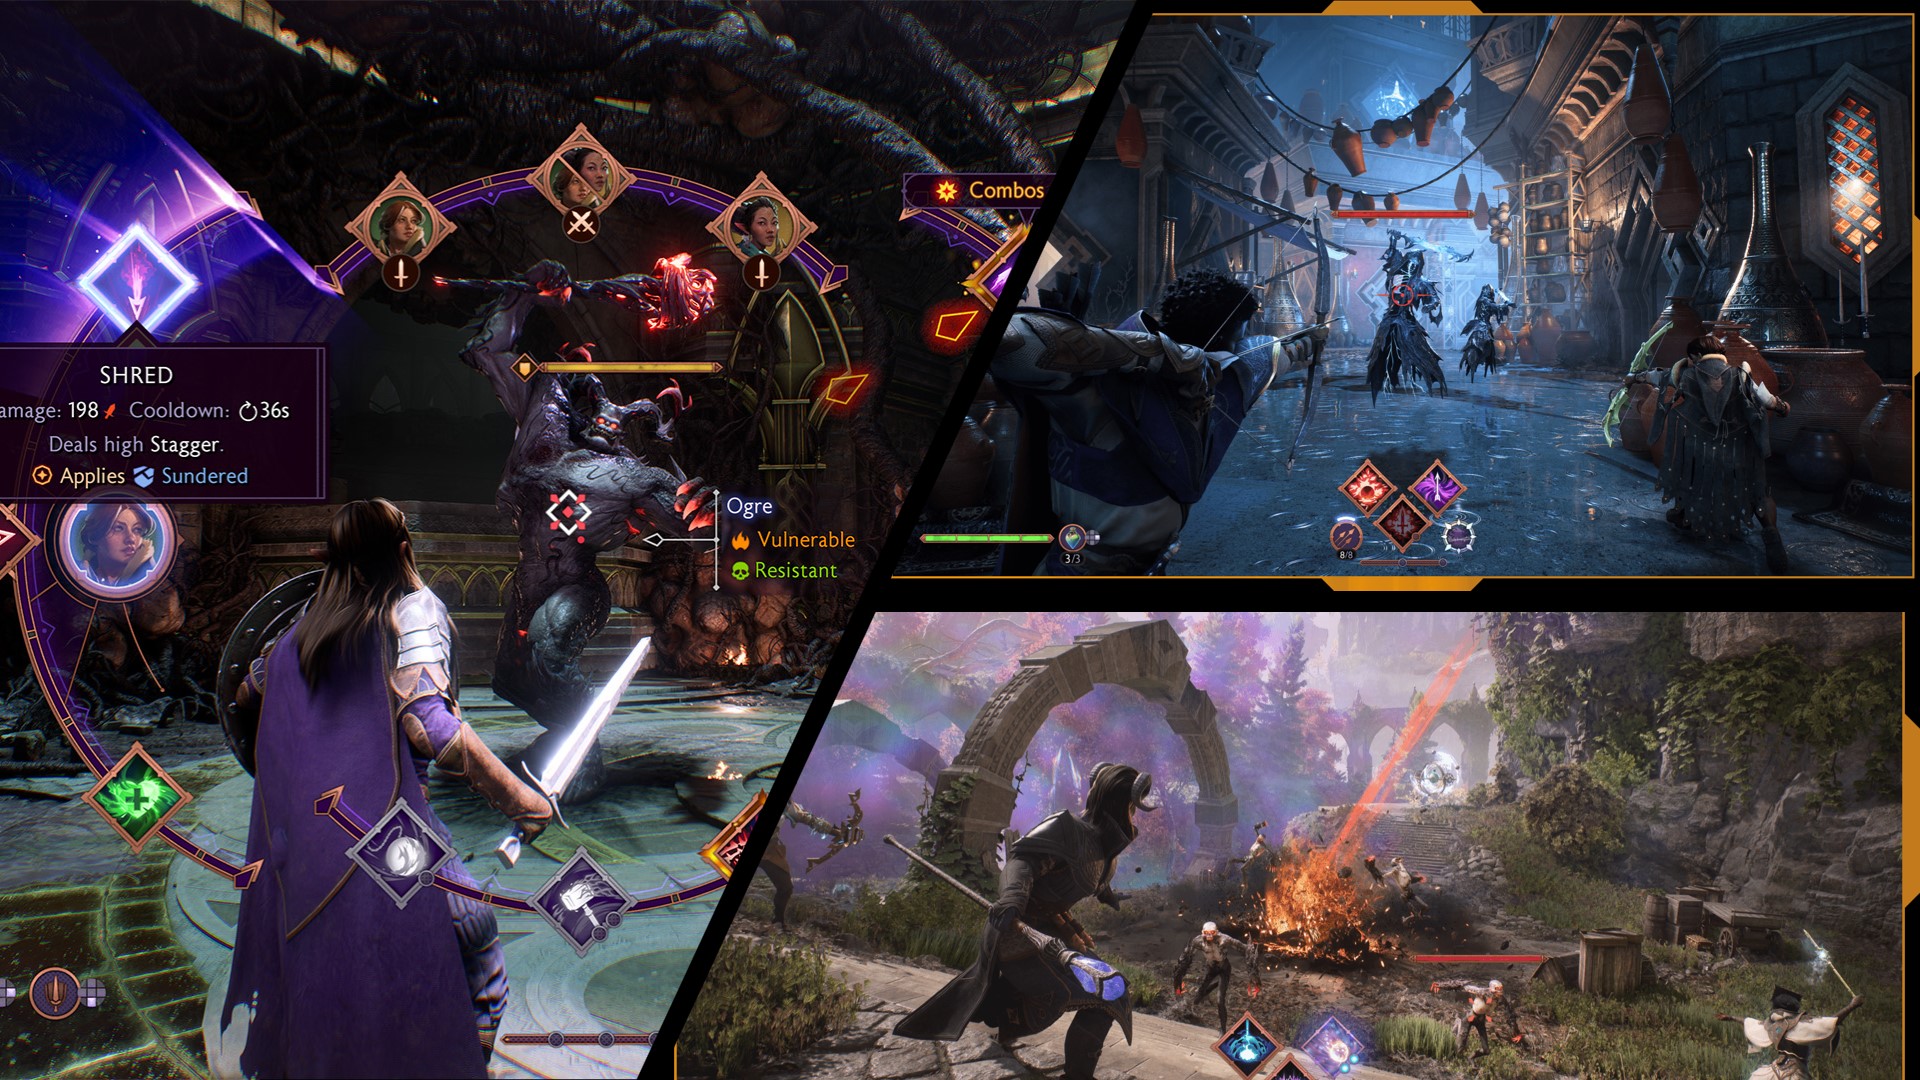 Dragon Age: The Veilguard – Skill Trees, Builds and Combat Analysis